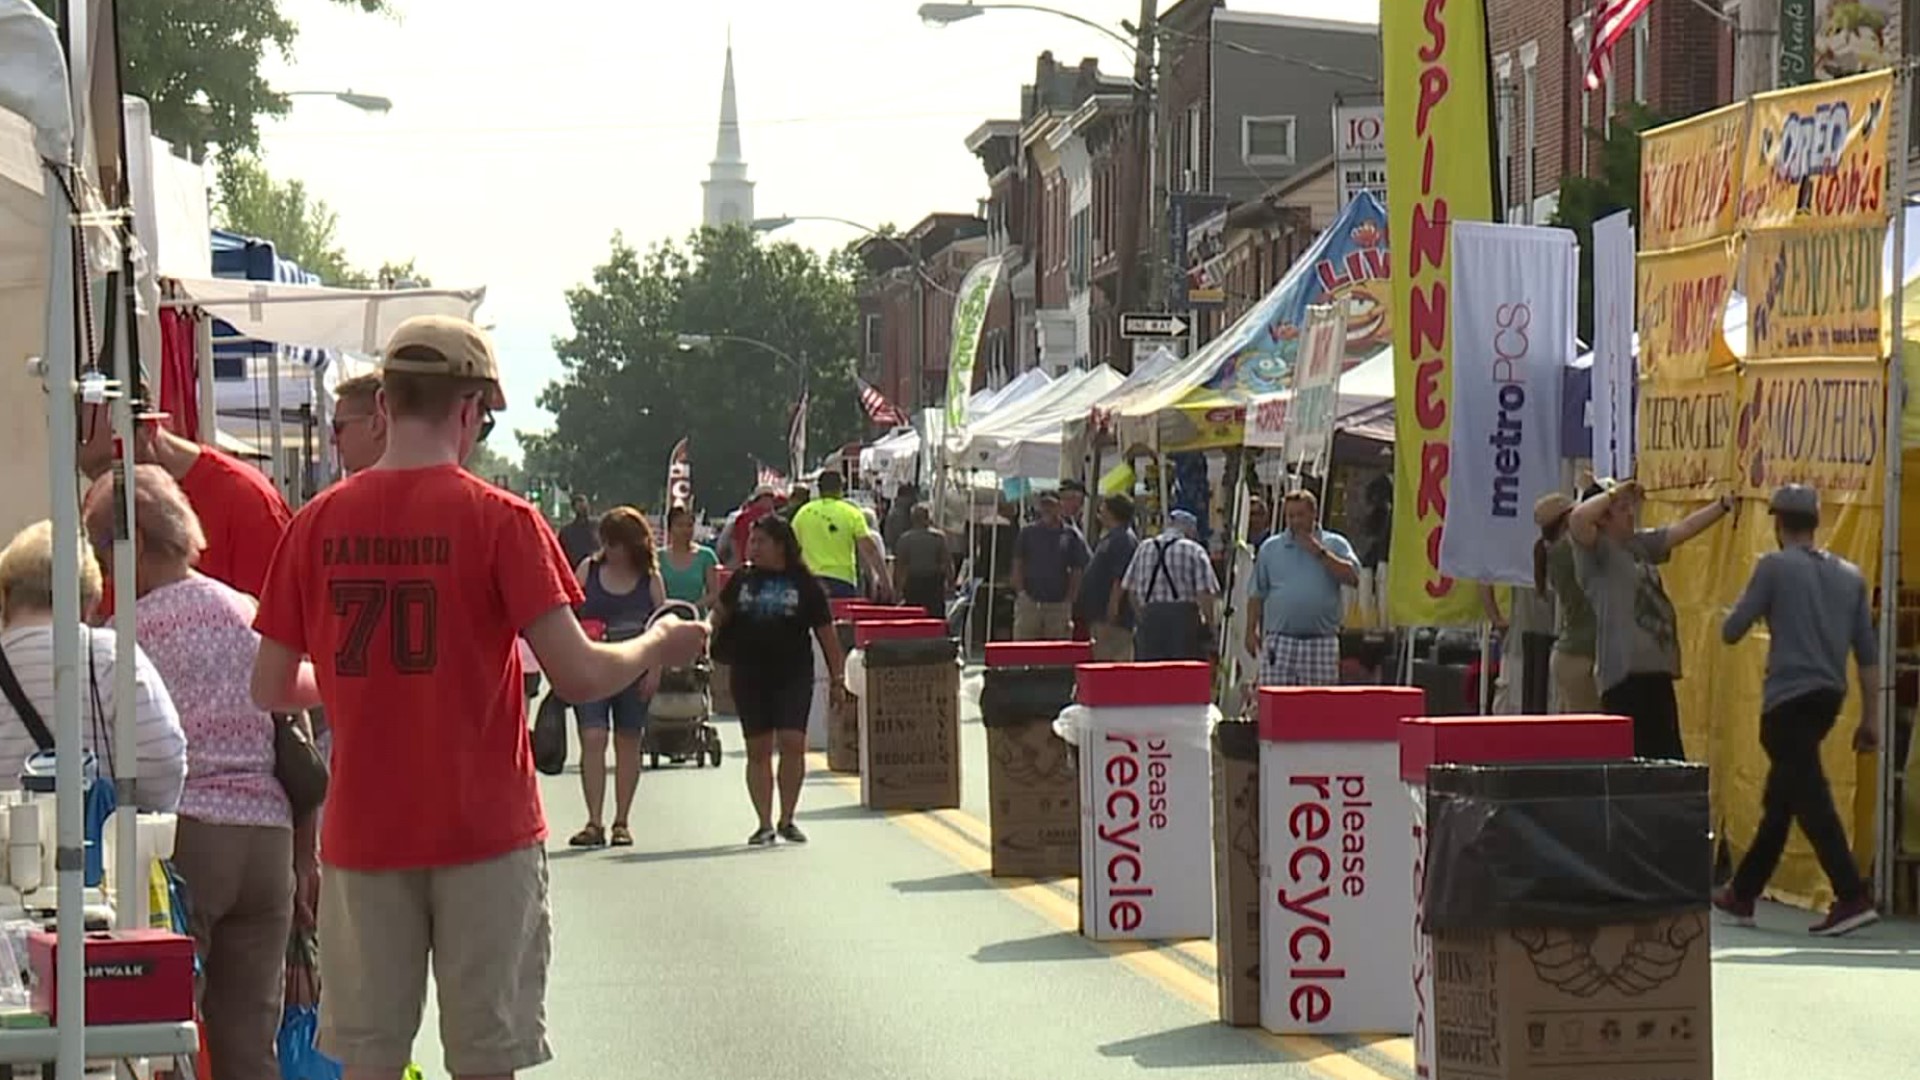 Organizers expect this year will draw just short of its usual 70,000 attendees. More than 325 vendors will be offering food, games, art, and more.